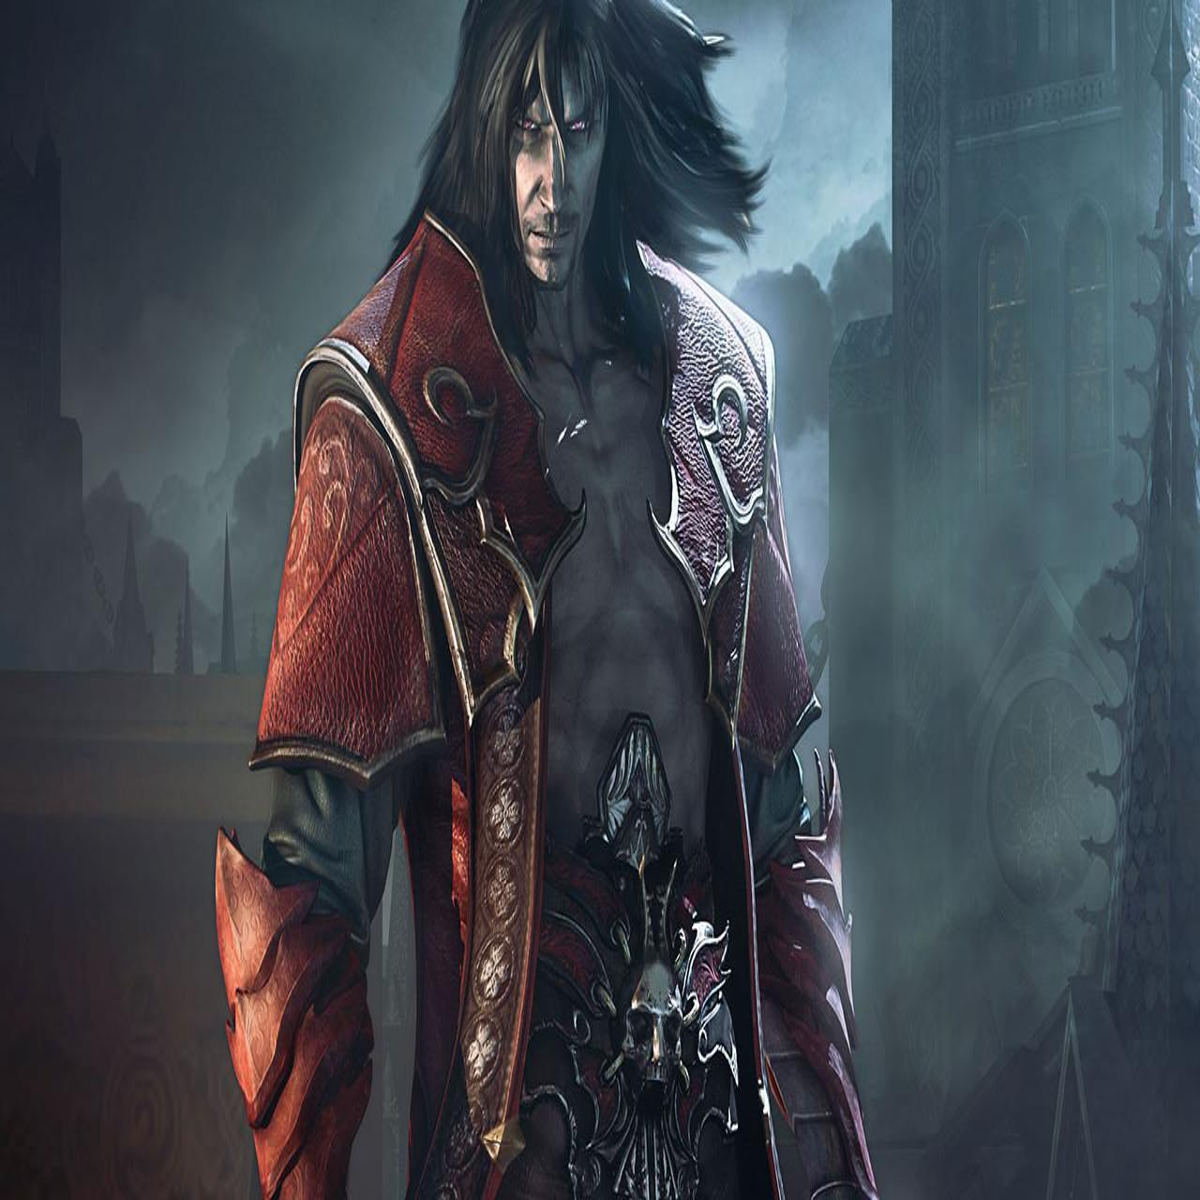 Castlevania Lords of Shadow 